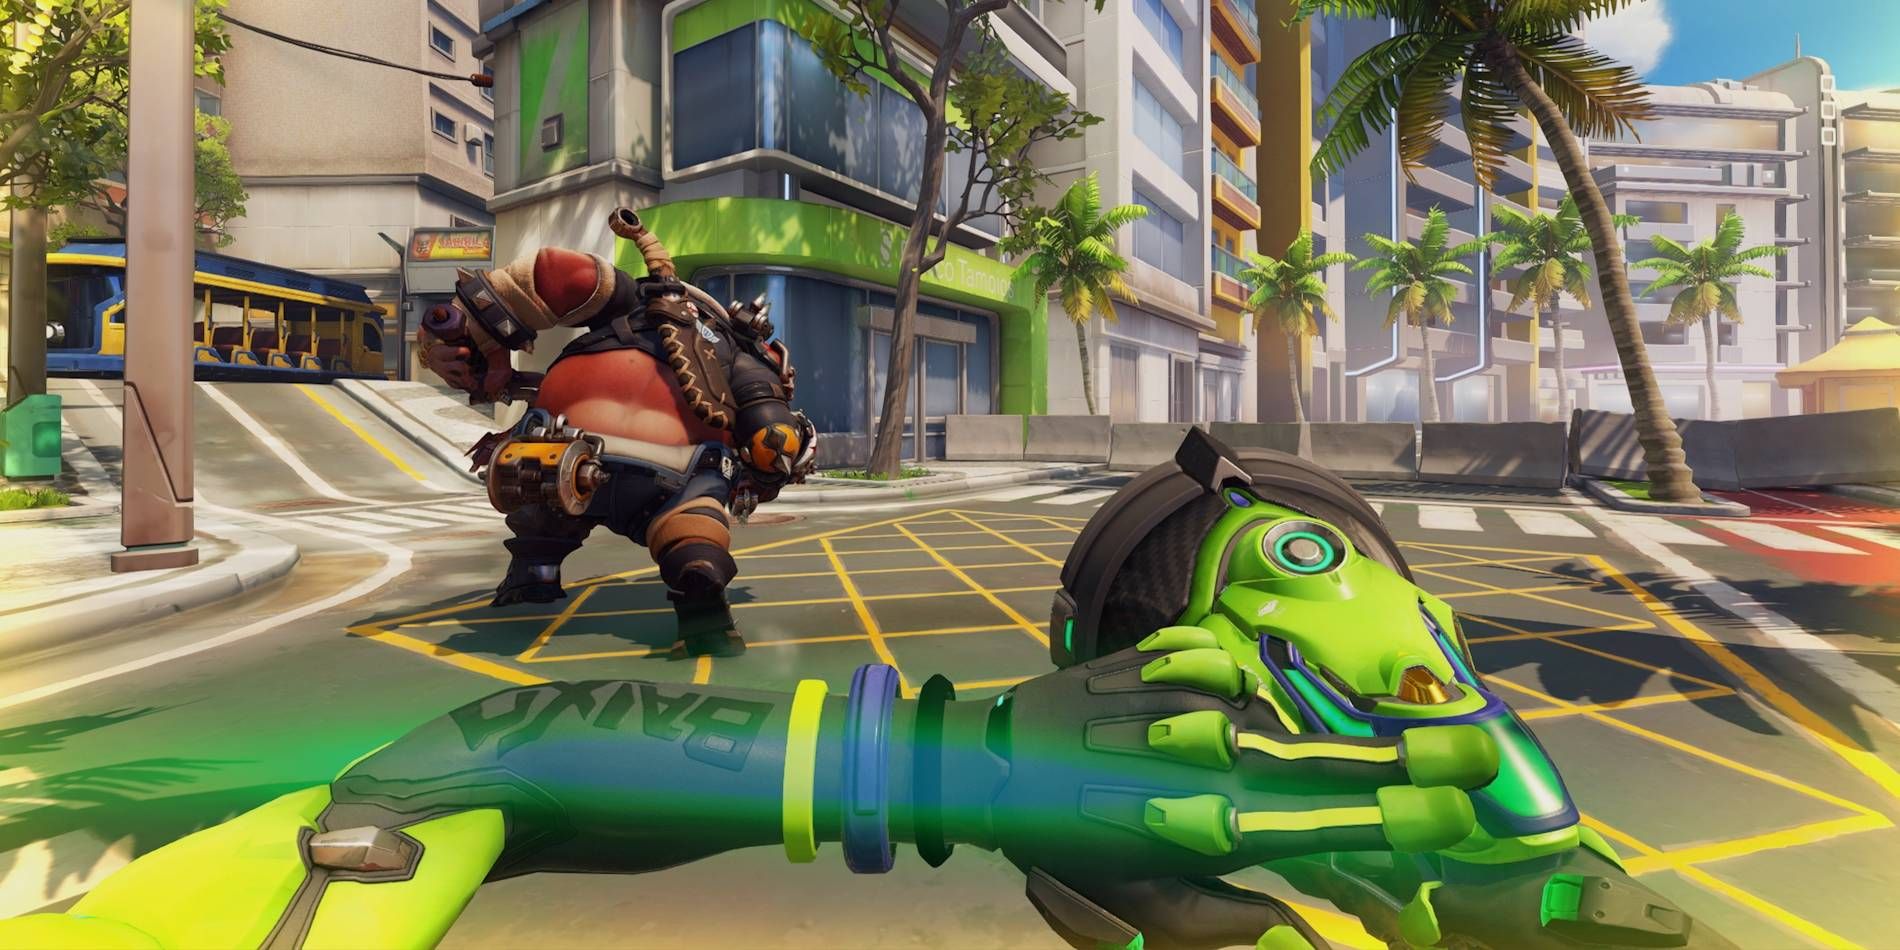 Overwatch 2 Lucio Using Crossfade Ability to Switch to Speed Boost Right Behind Roadhog 